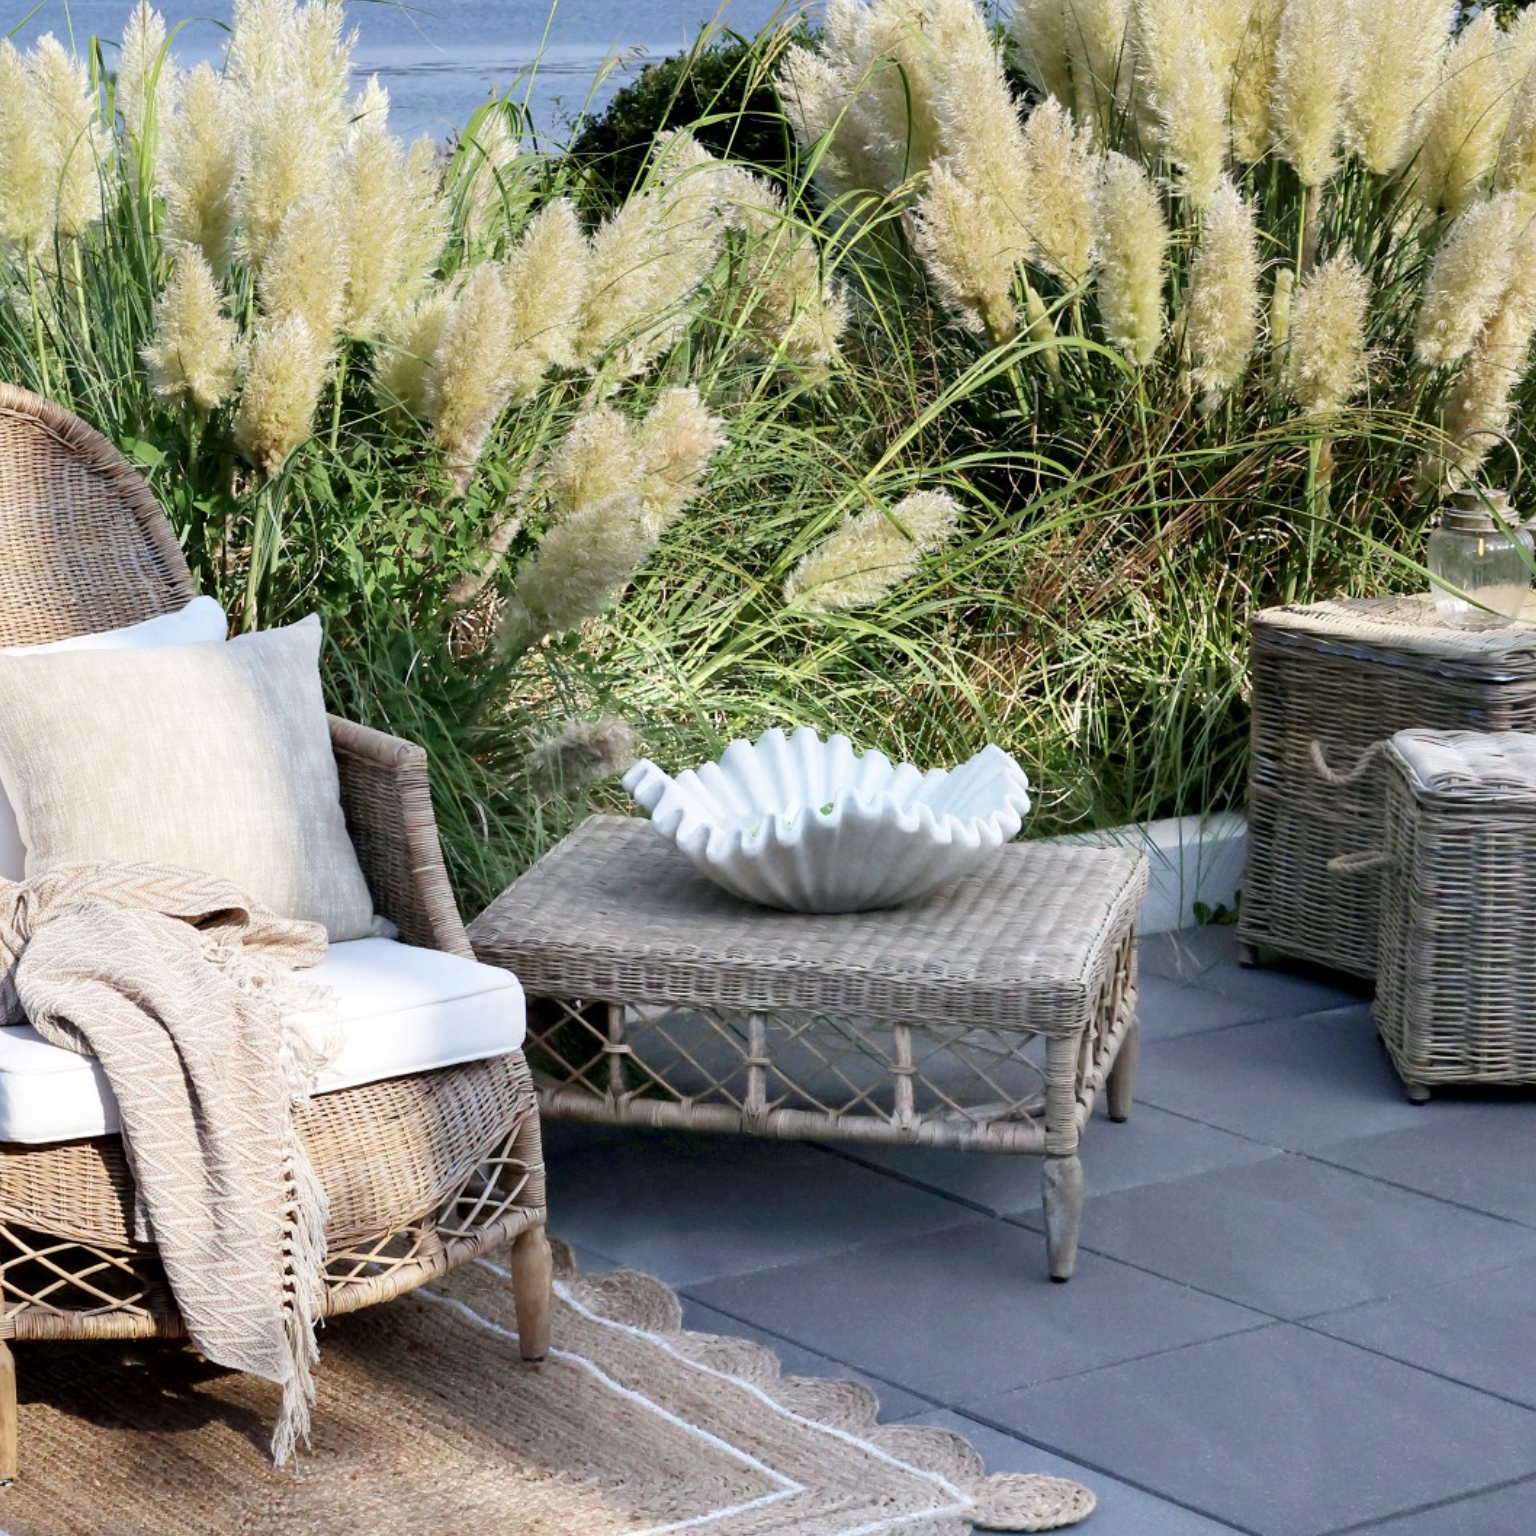 Braided rattan coffee table in outdoor living soae with pampas grass.